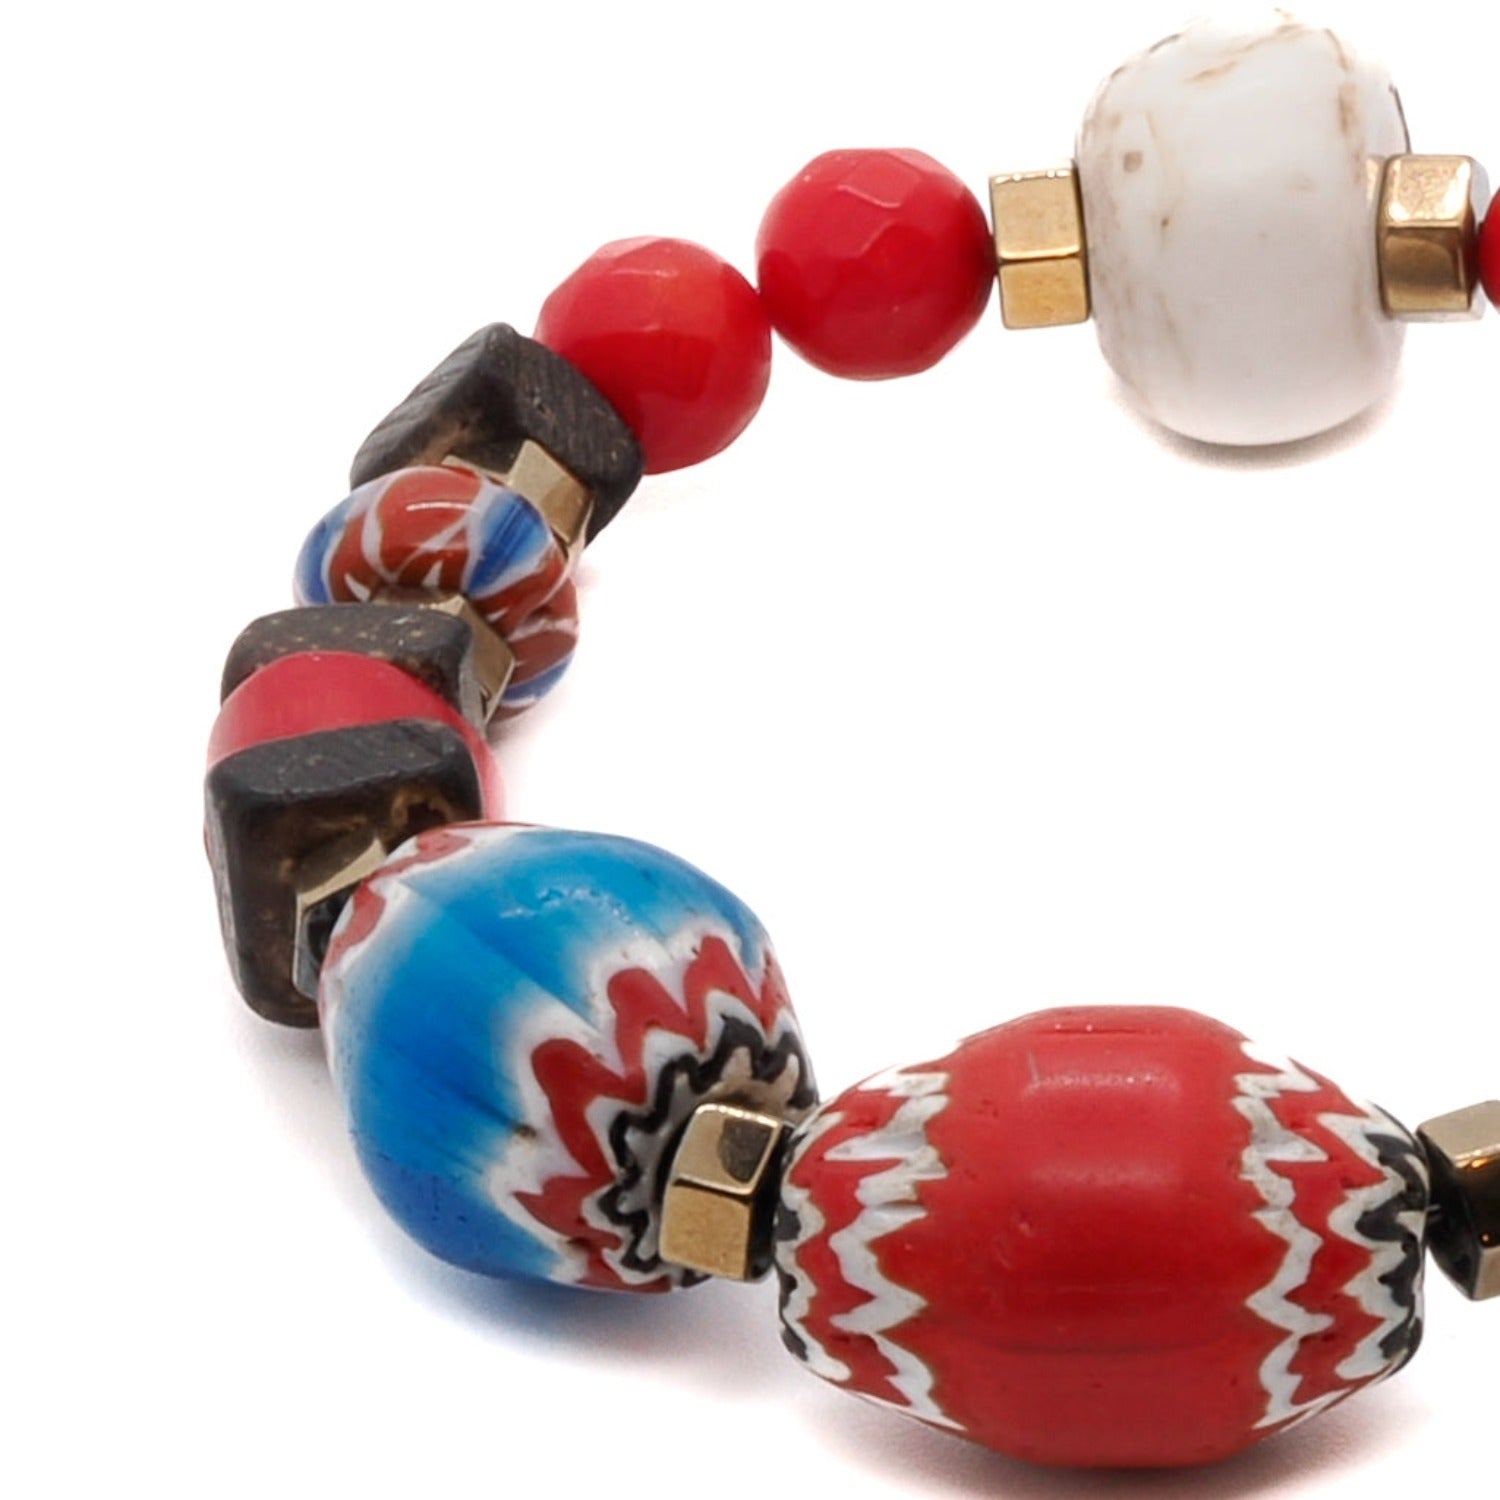 Discover the passion and energy of the Palena Bracelet, a handmade piece of jewelry crafted with red coral stone and gold hematite spacers.